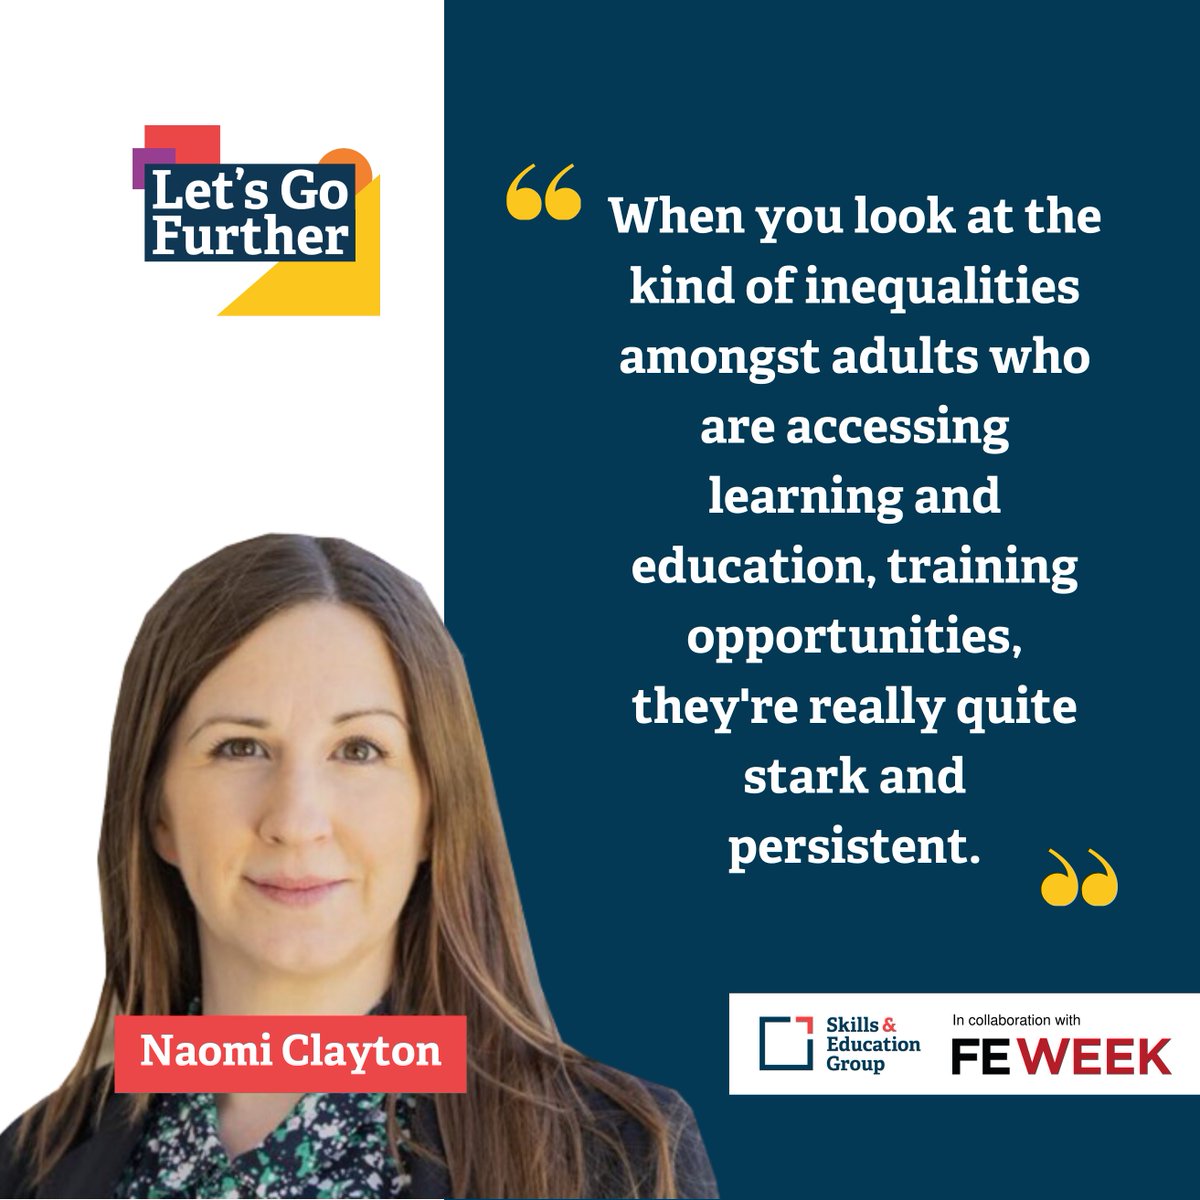 What can the FE sector, government and businesses do about persistent inequalities in adult education and skills training? Listen to @NaomiClaytonUK and @STuckett in the latest ep of the #LetsGoFurtherPod to find more. 🔗 buff.ly/4axMEmT @LearnWorkUK @EduPolicyInst